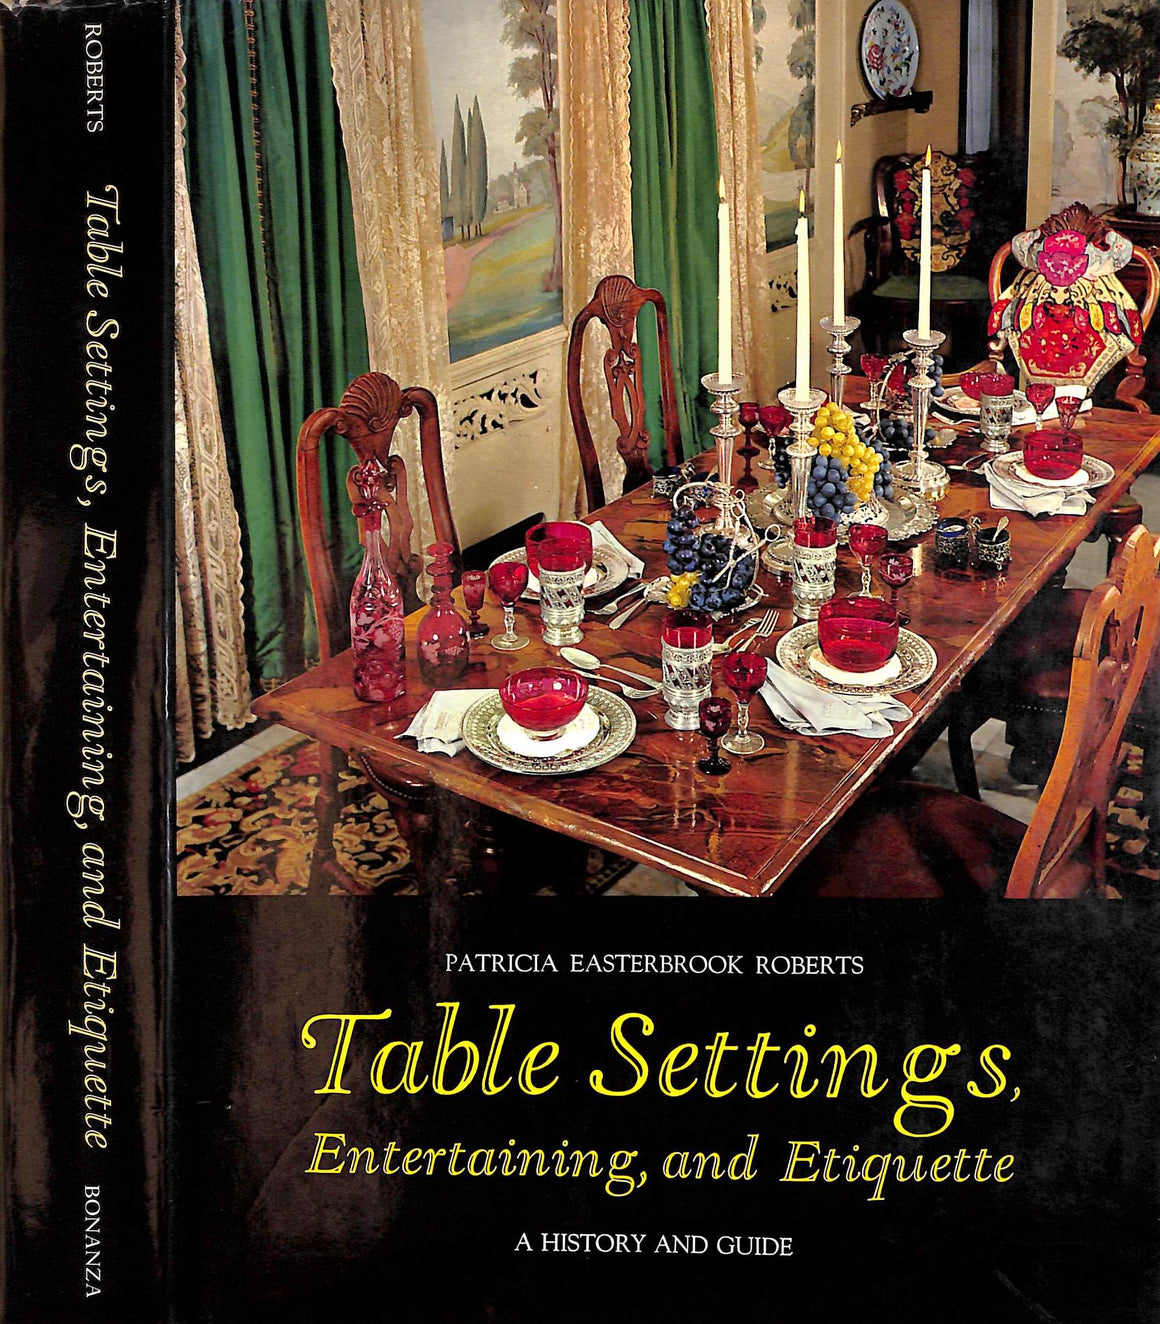 "Table Settings, Entertaining, and Etiquette A History And Guide" ROBERTS, Patricia Easterbrook